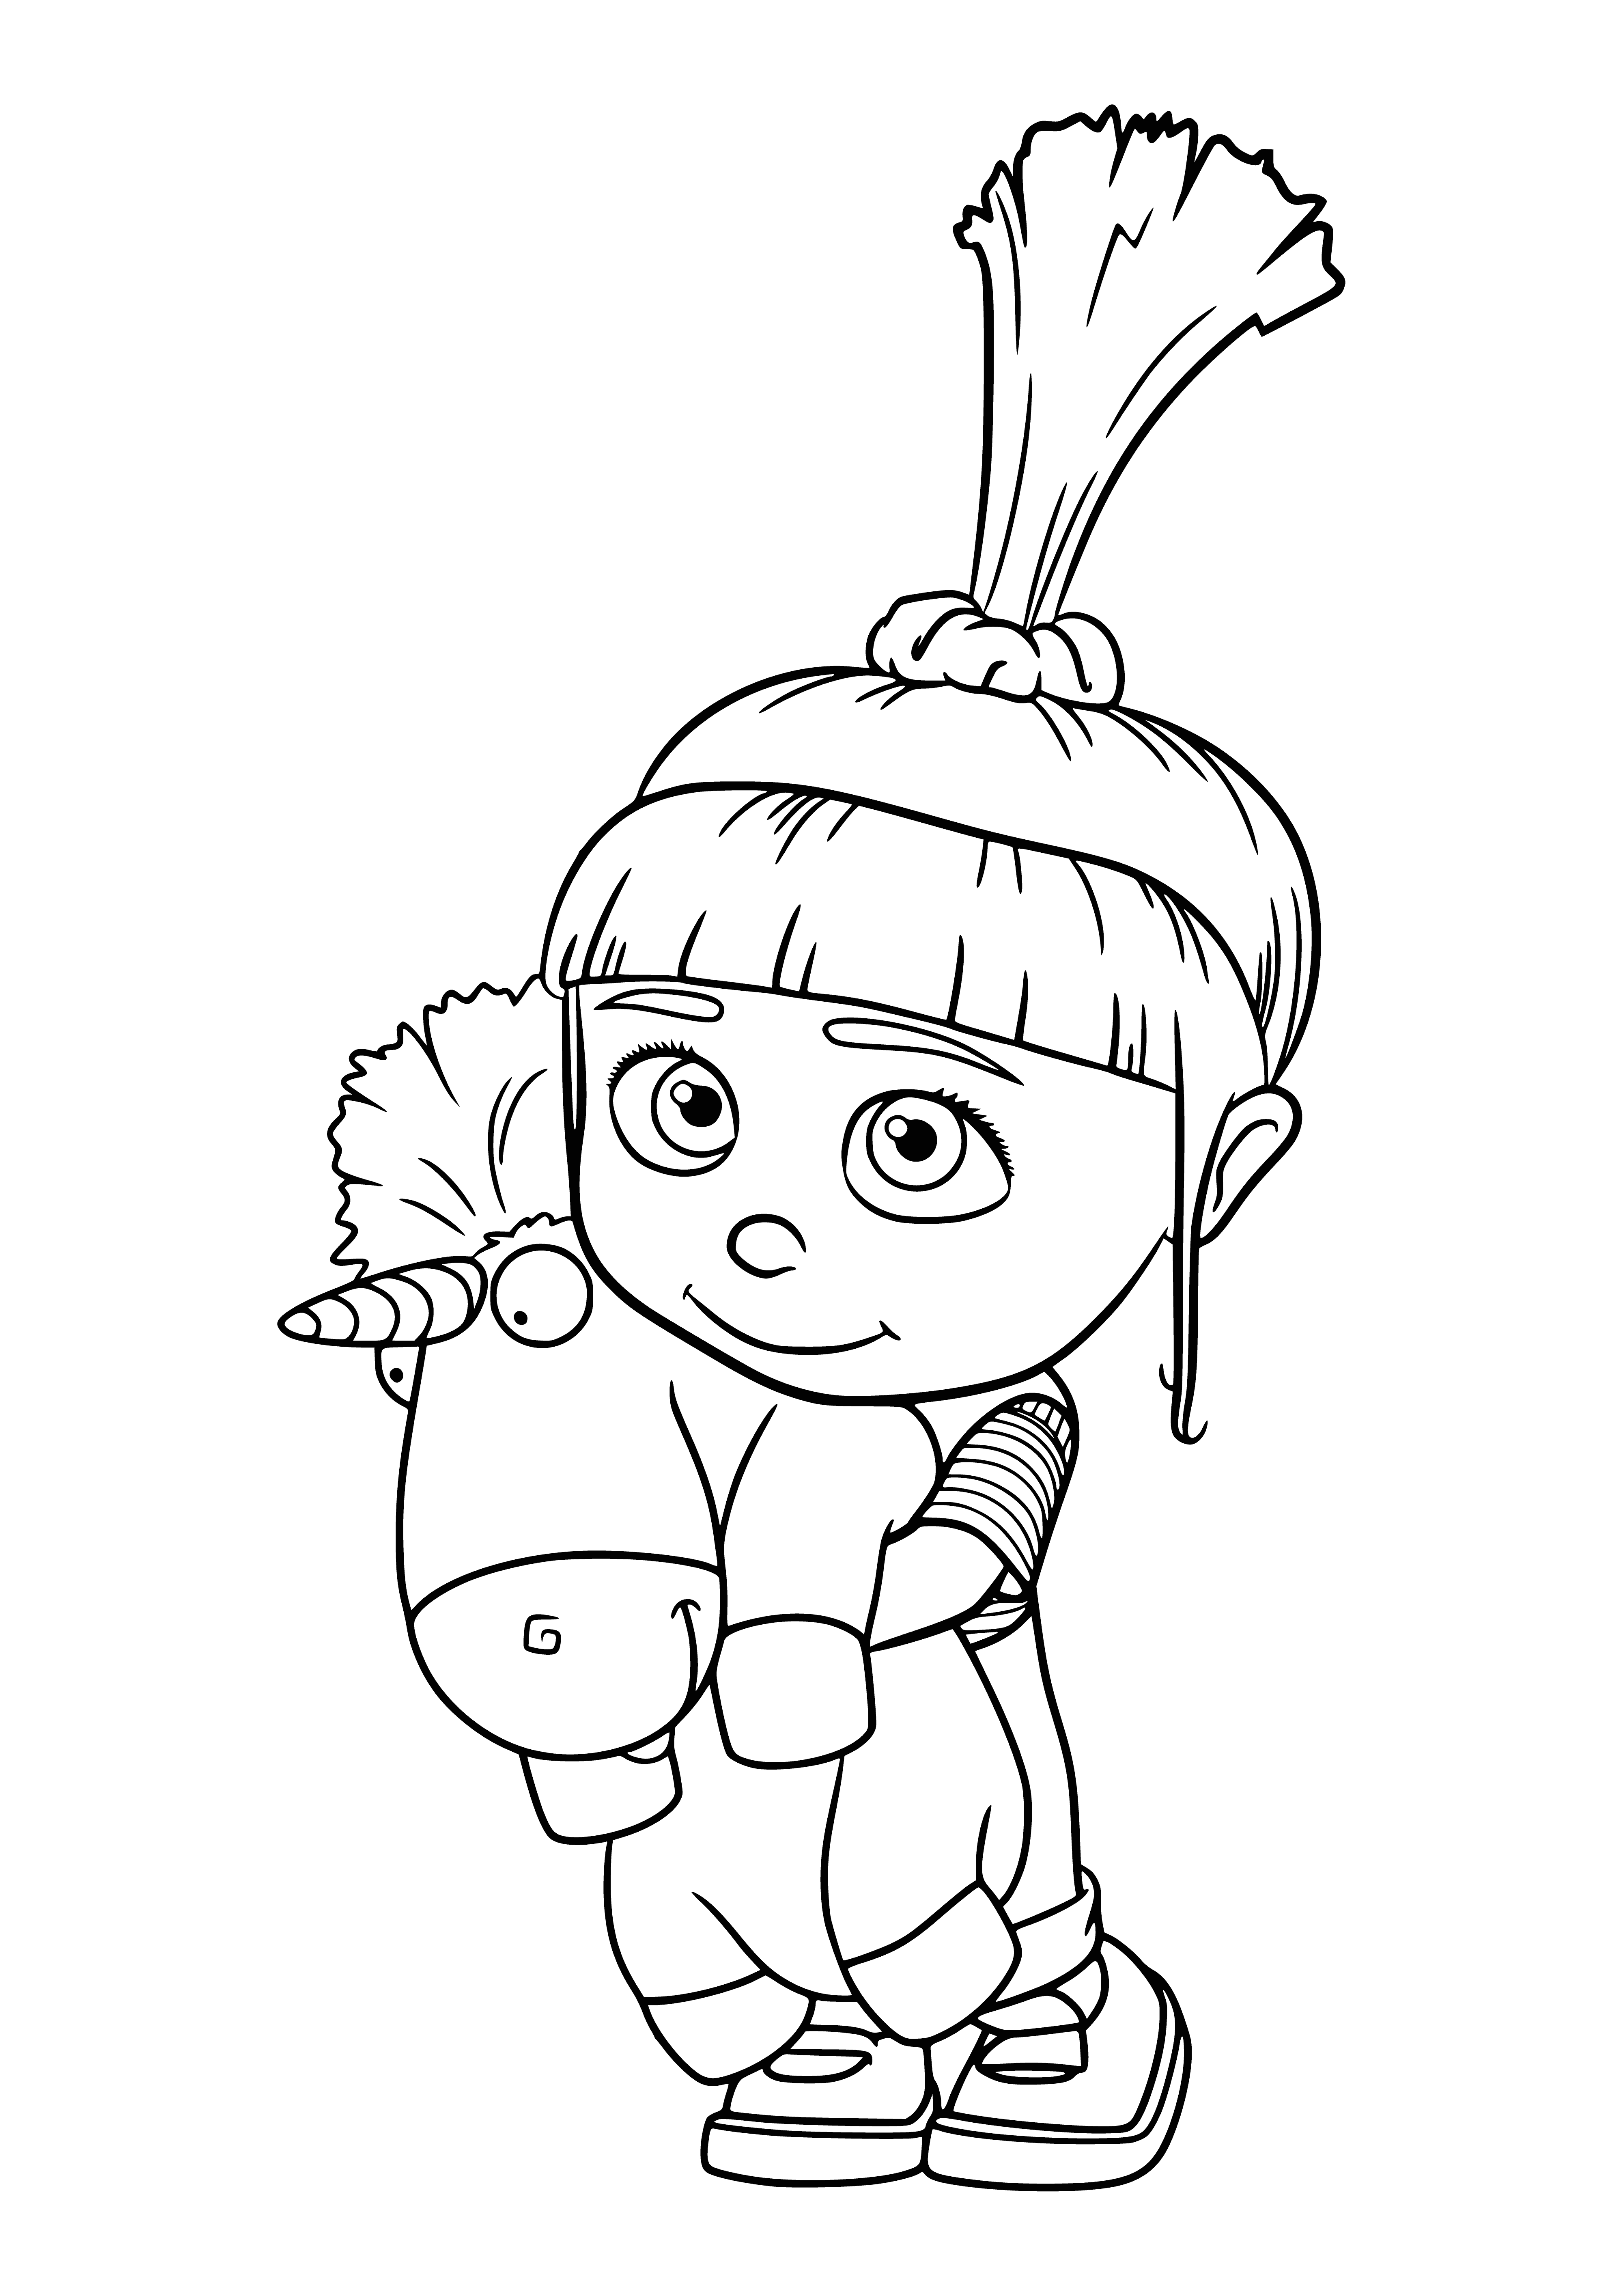 Agnes with a unicorn coloring page